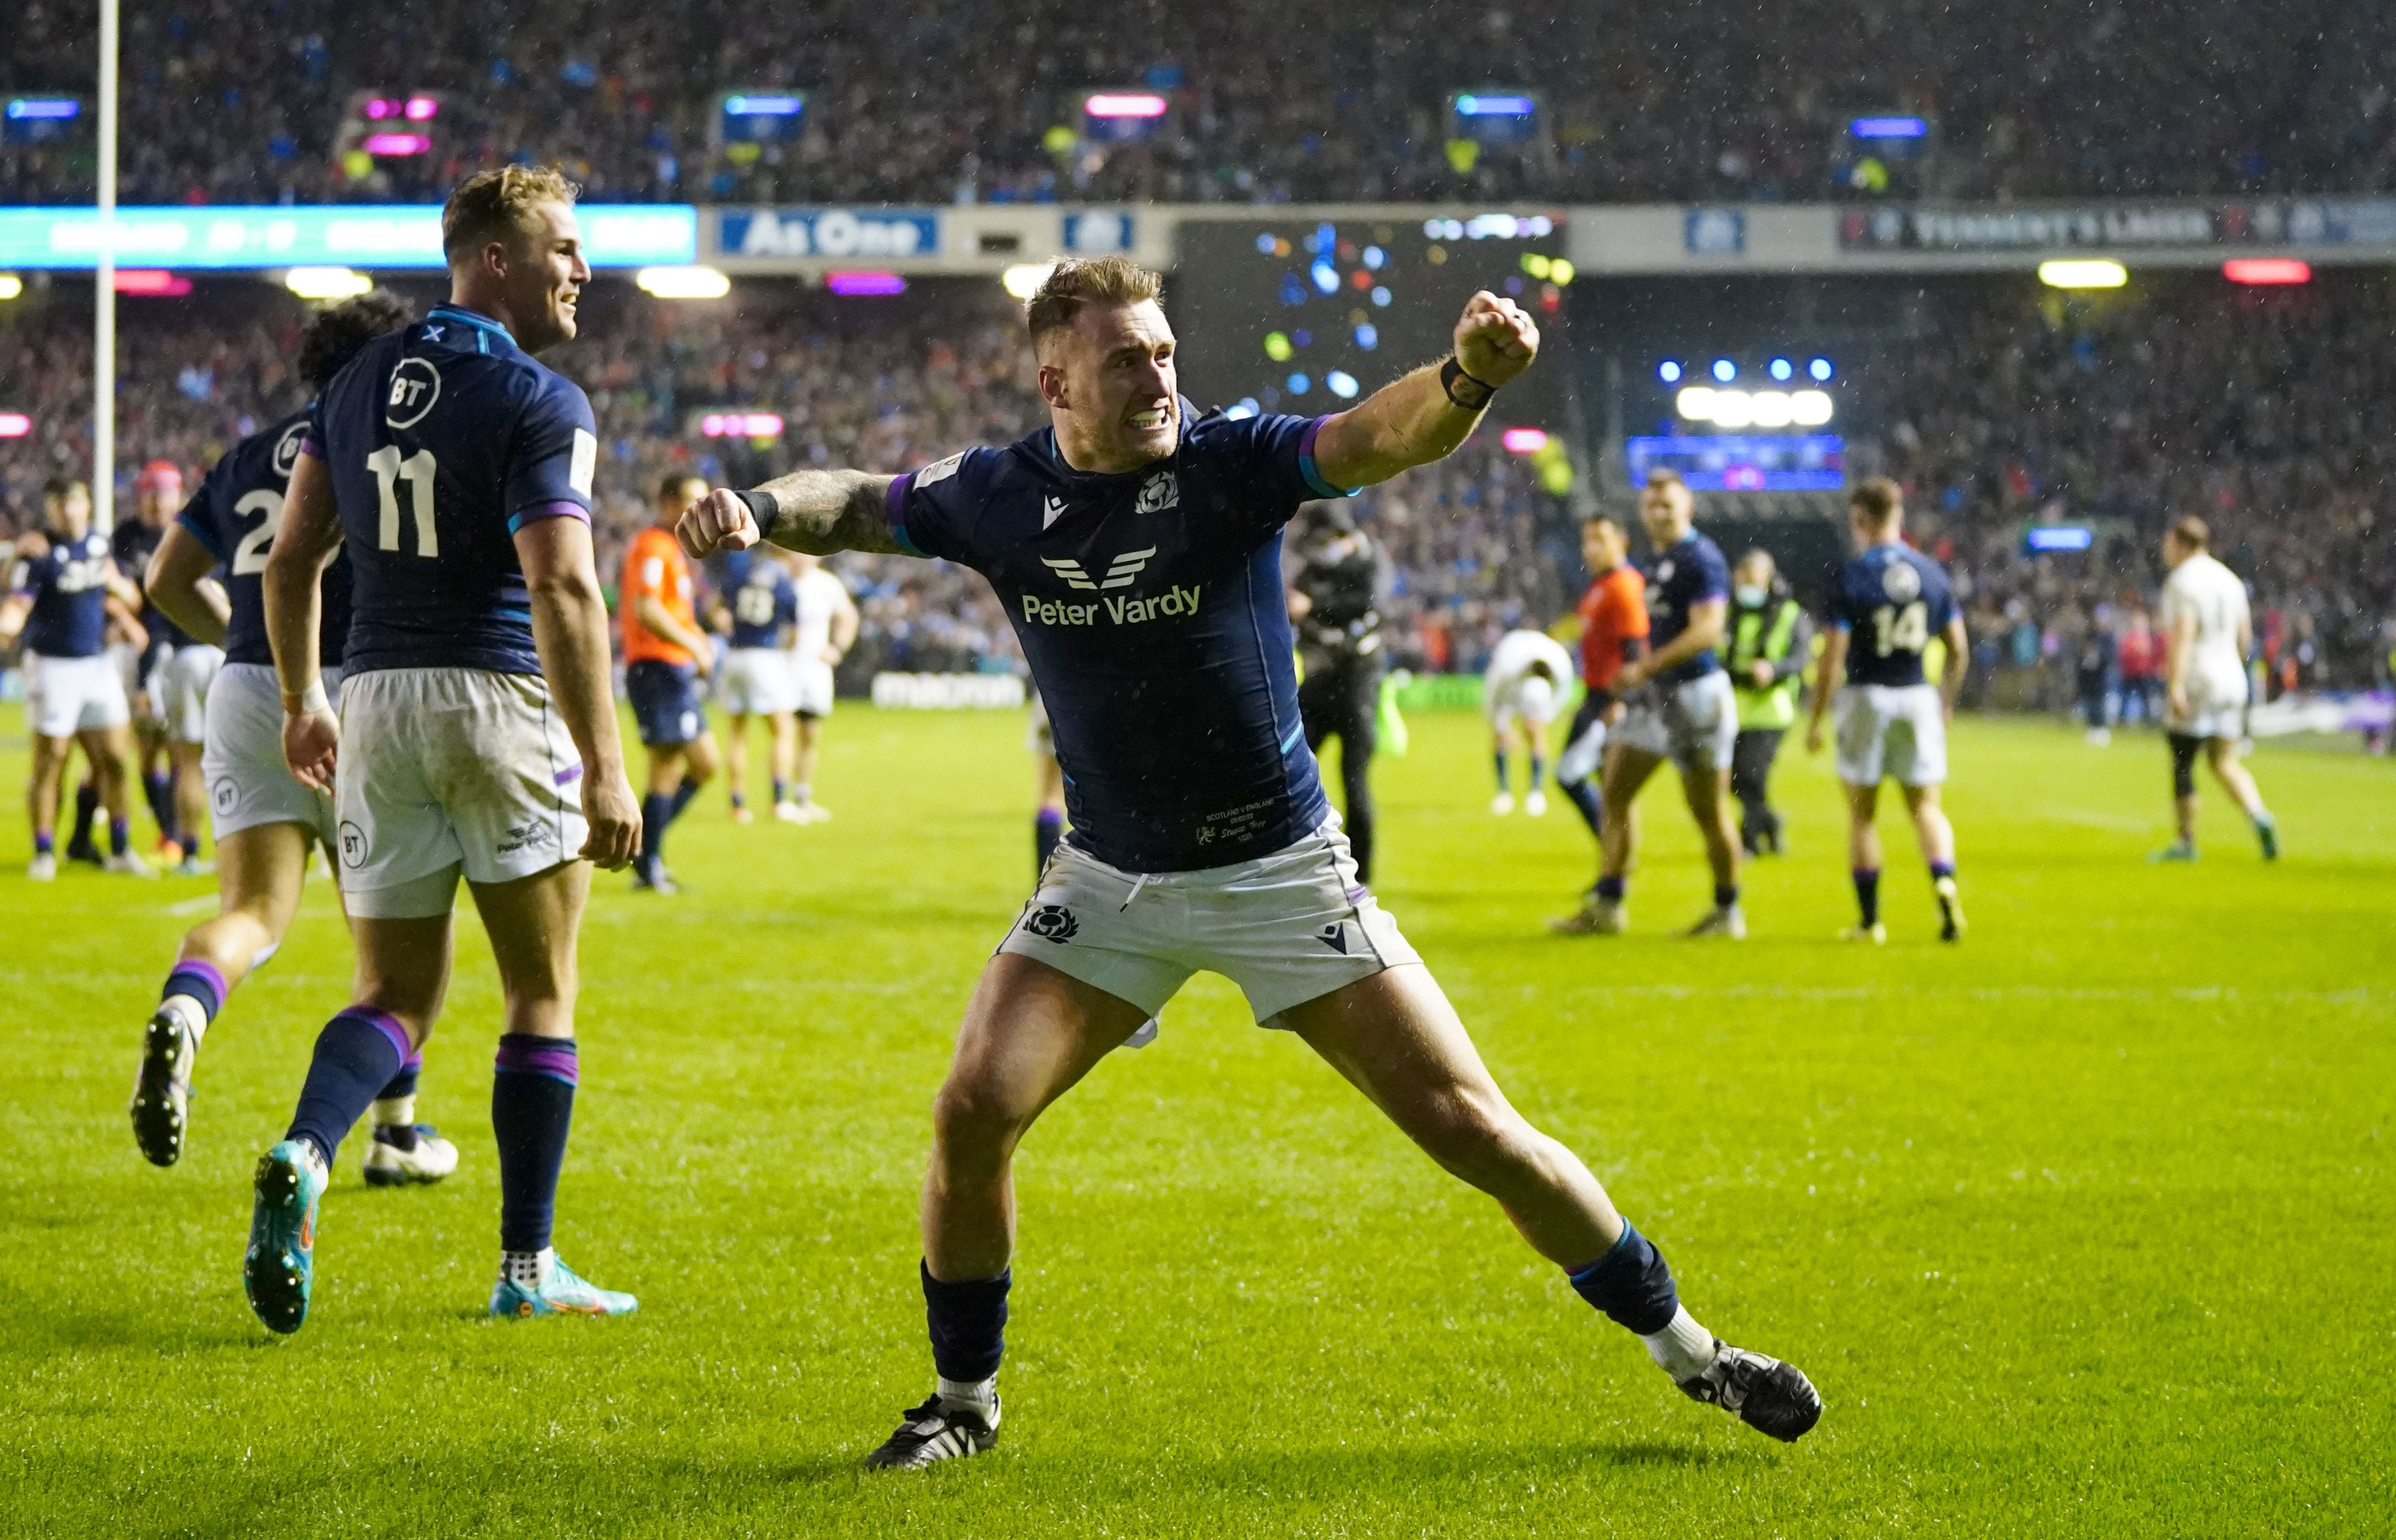 Scotland cling on to beat England and retain Calcutta Cup in tense Six Nations battle The Independent